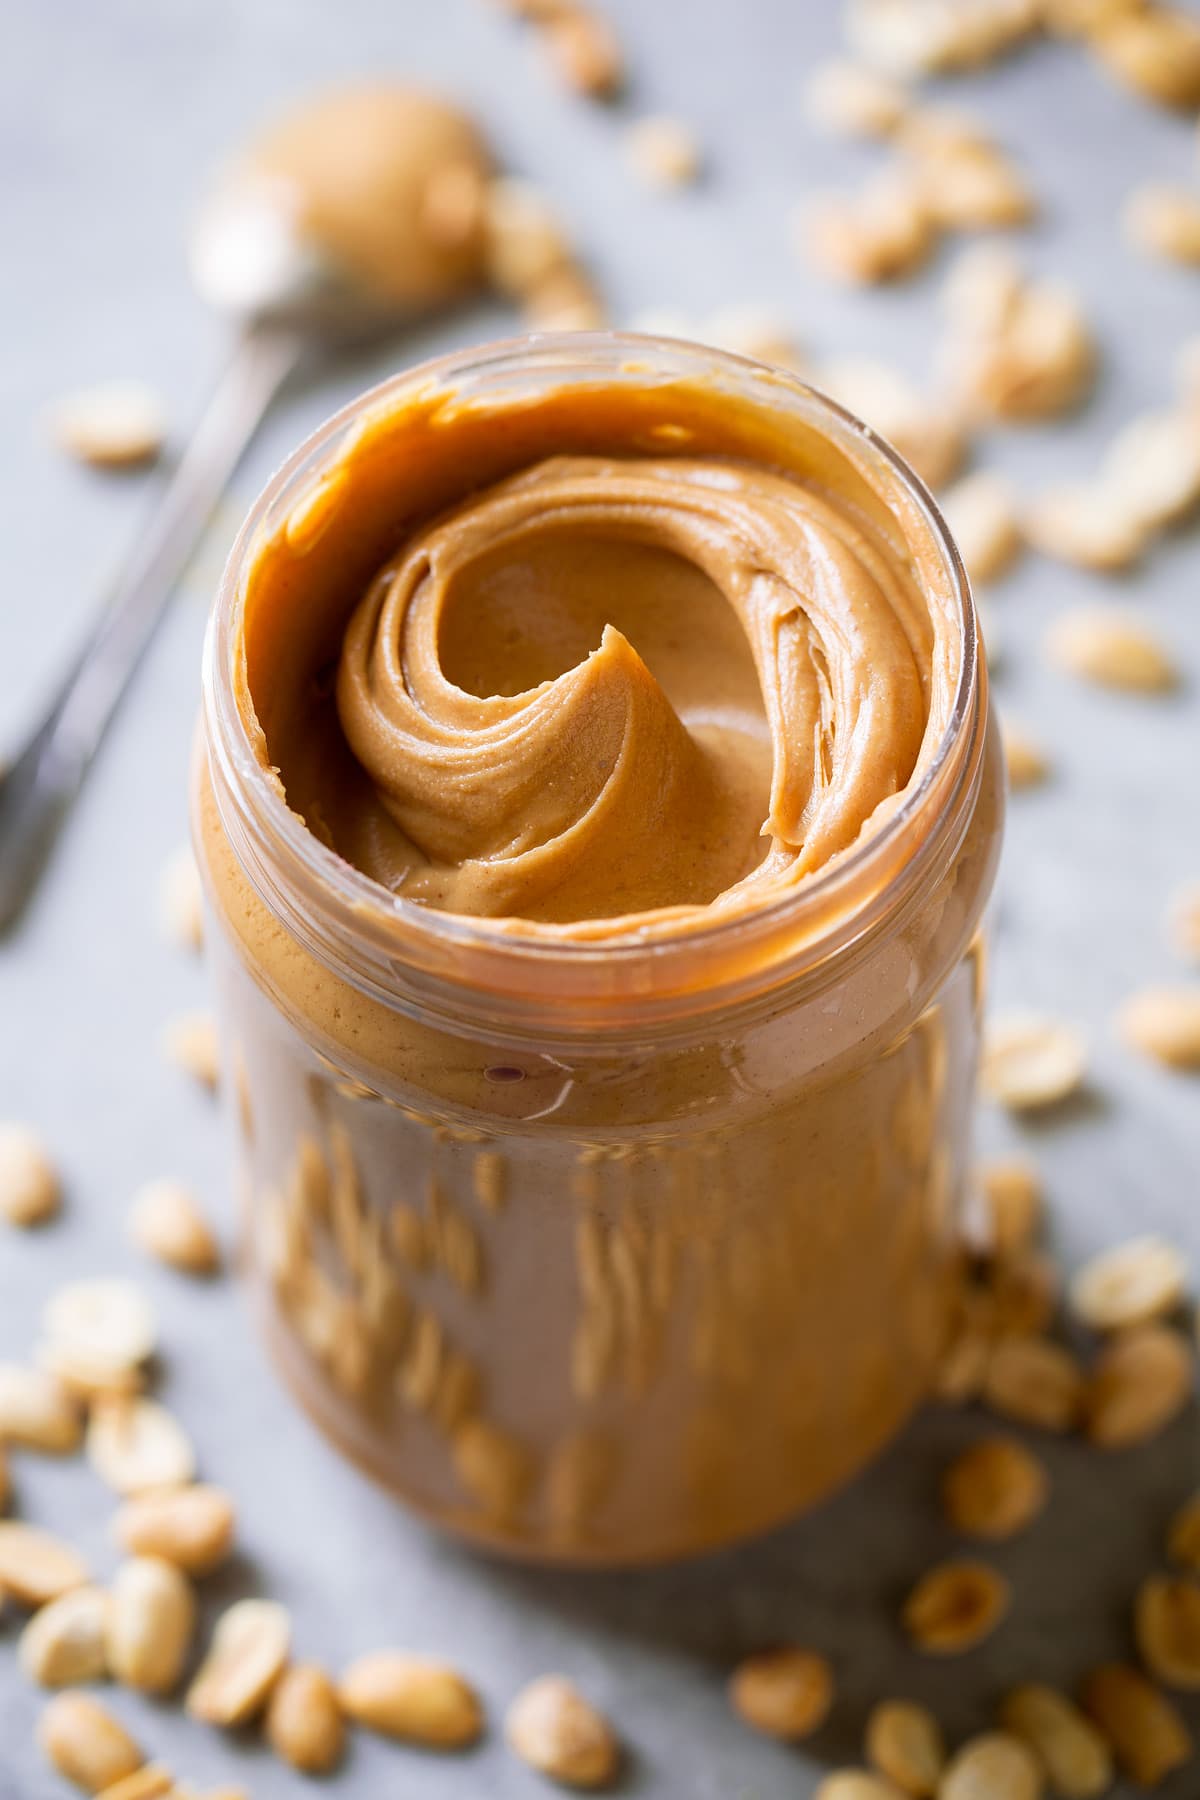 Image of creamy peanut butter in jar, type of peanut butter used for Peanut Butter Cookies